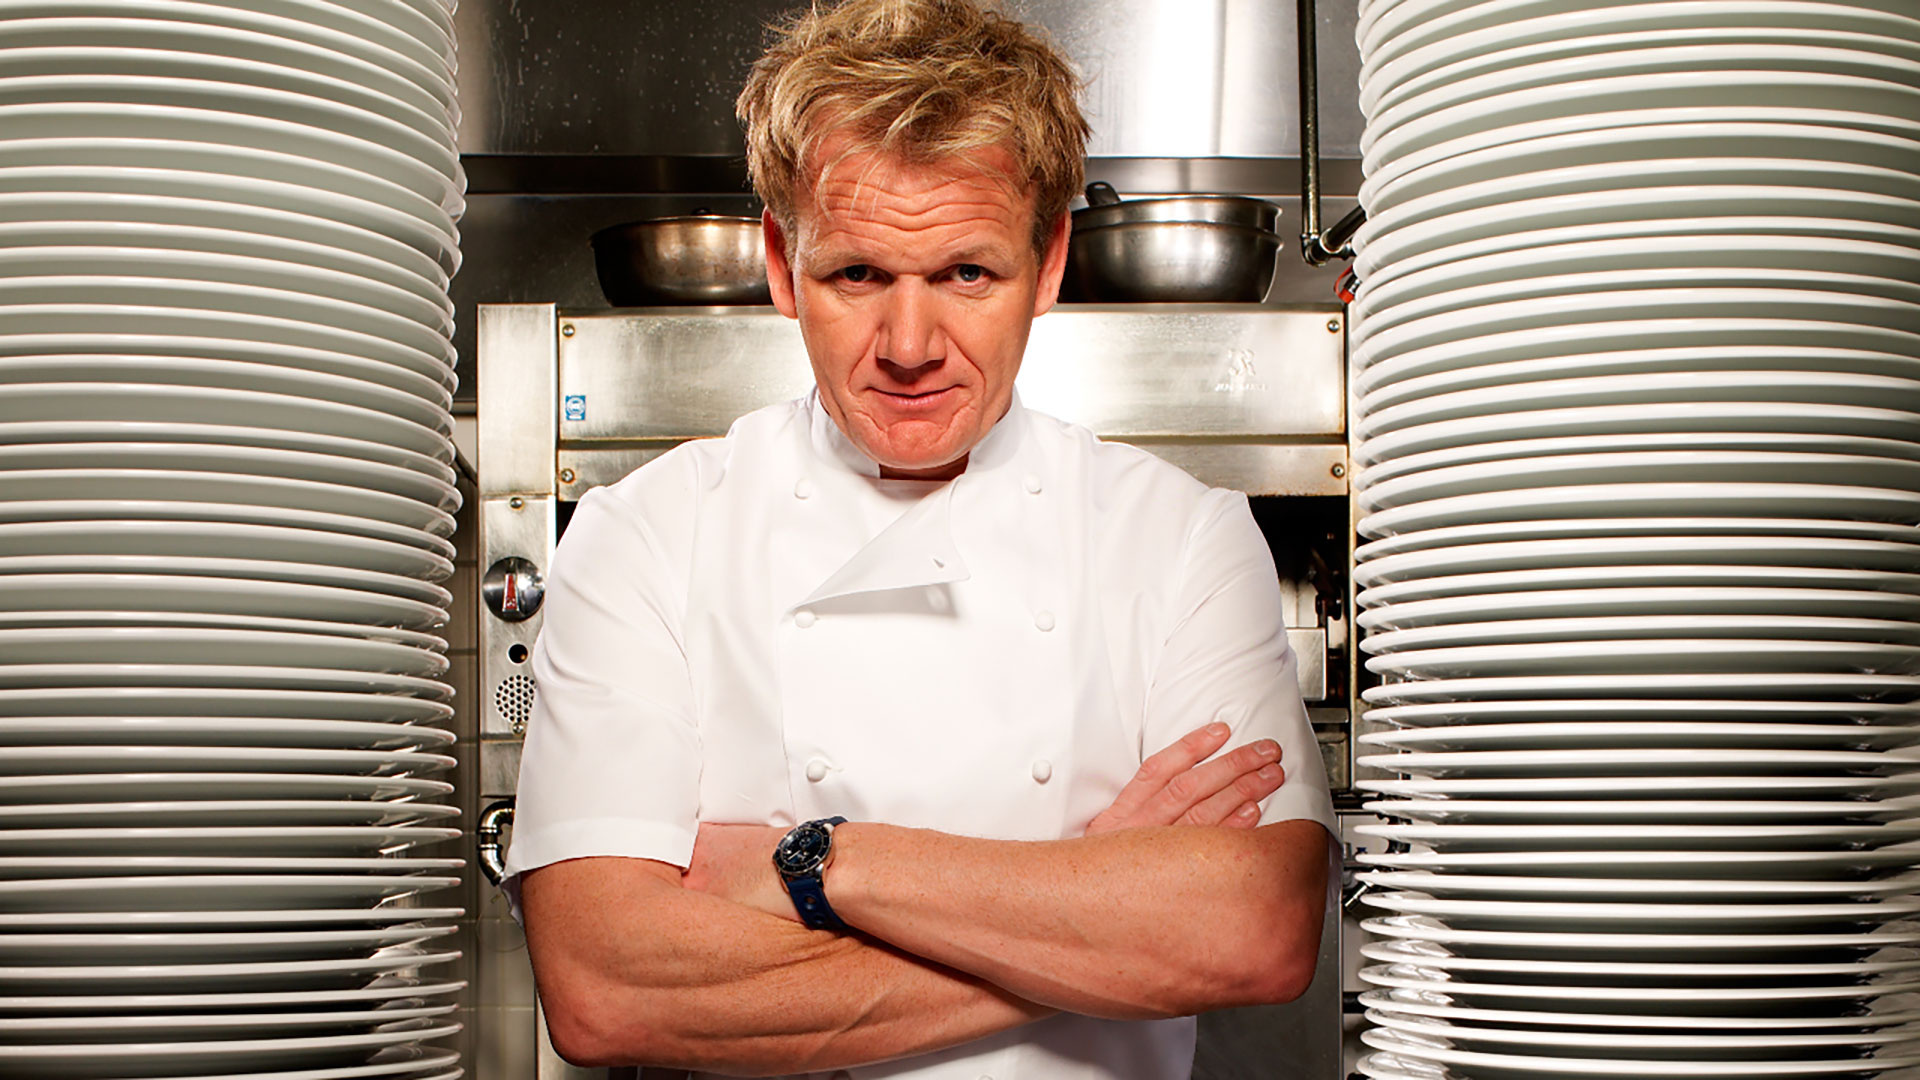 Gordon Ramsay: Set a Guinness World Record for the 'Fastest time to fillet a 10 lb fish' on 14 June 2017. 1920x1080 Full HD Background.